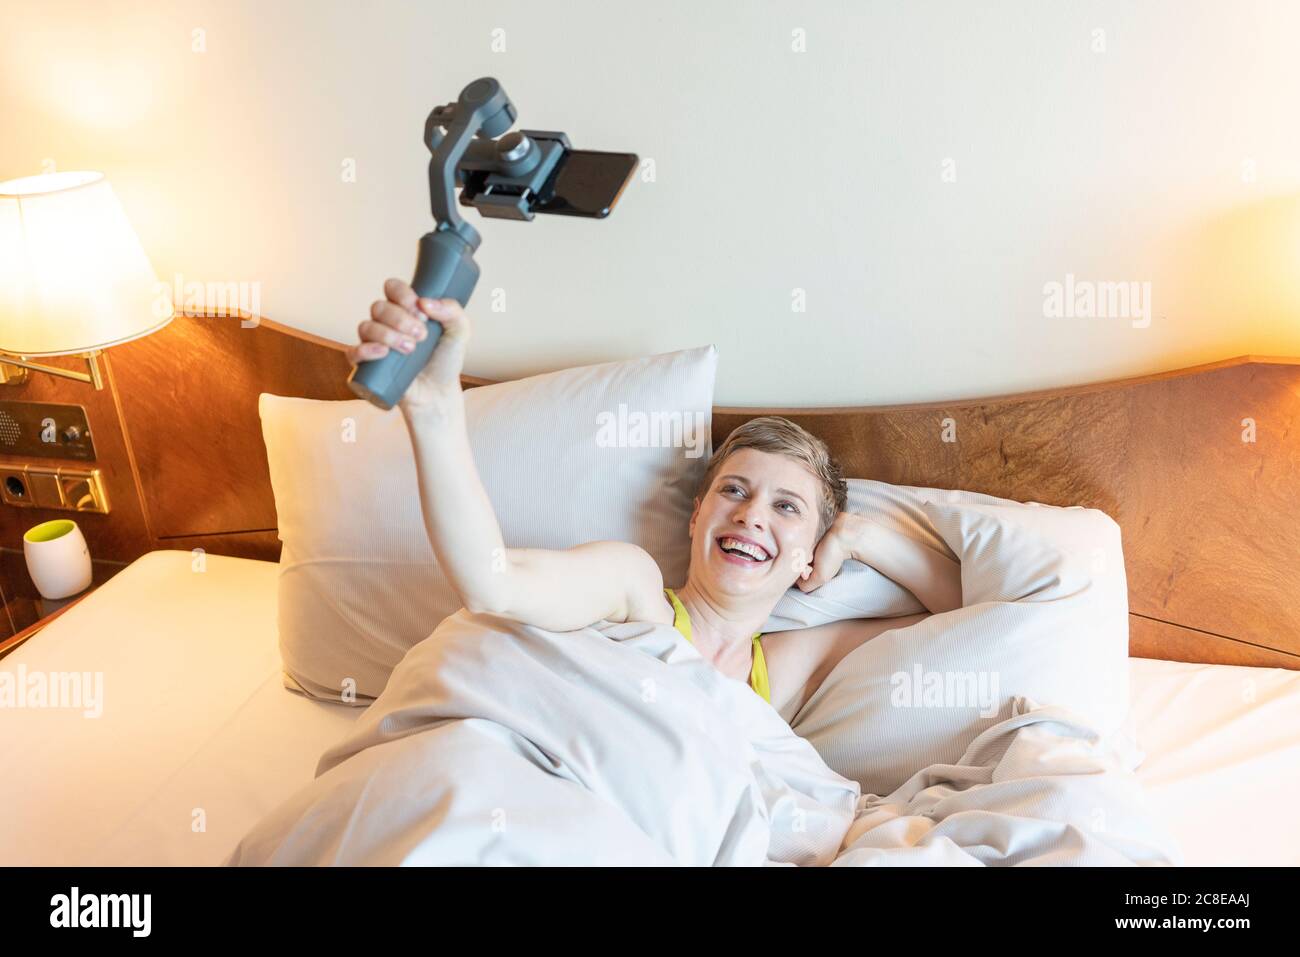 Smiling beautiful woman taking selfie while lying on bed at home Stock Photo